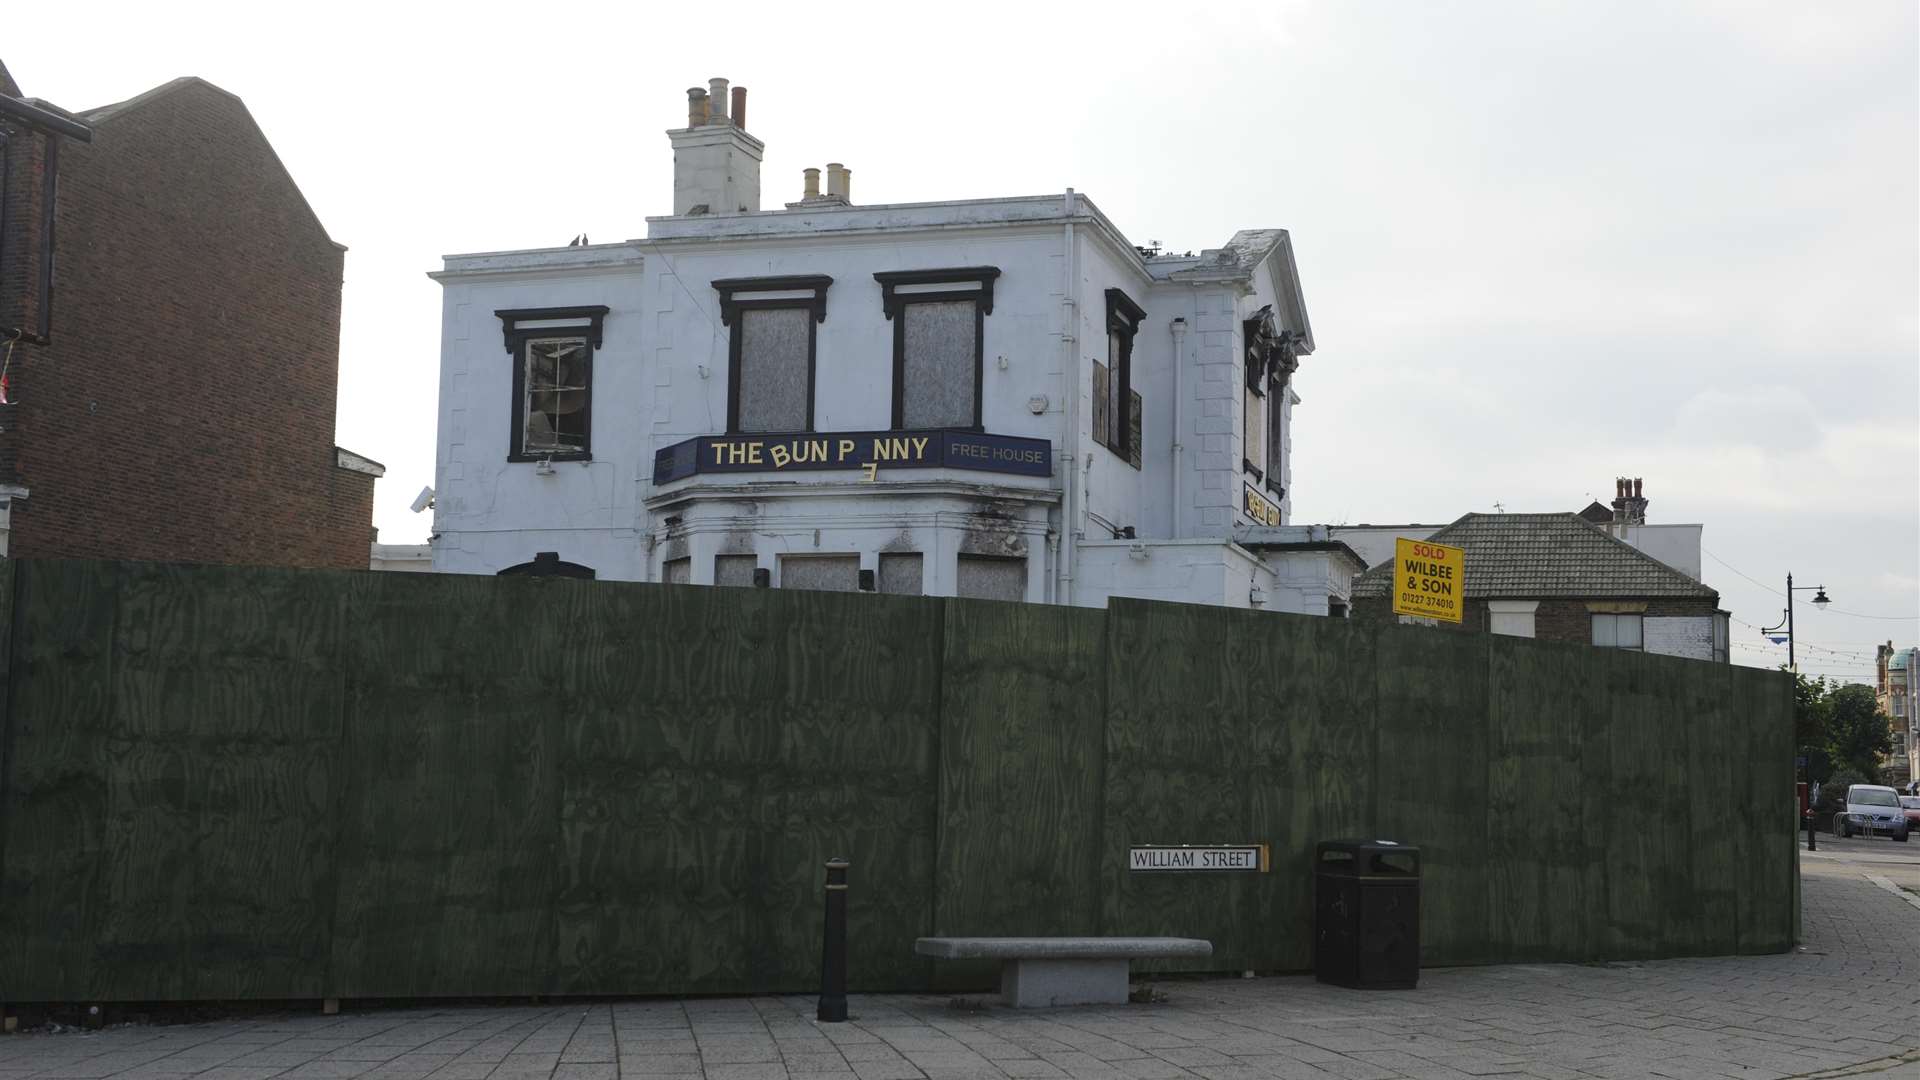 The former pub has been the town's biggest eyesore since 2011